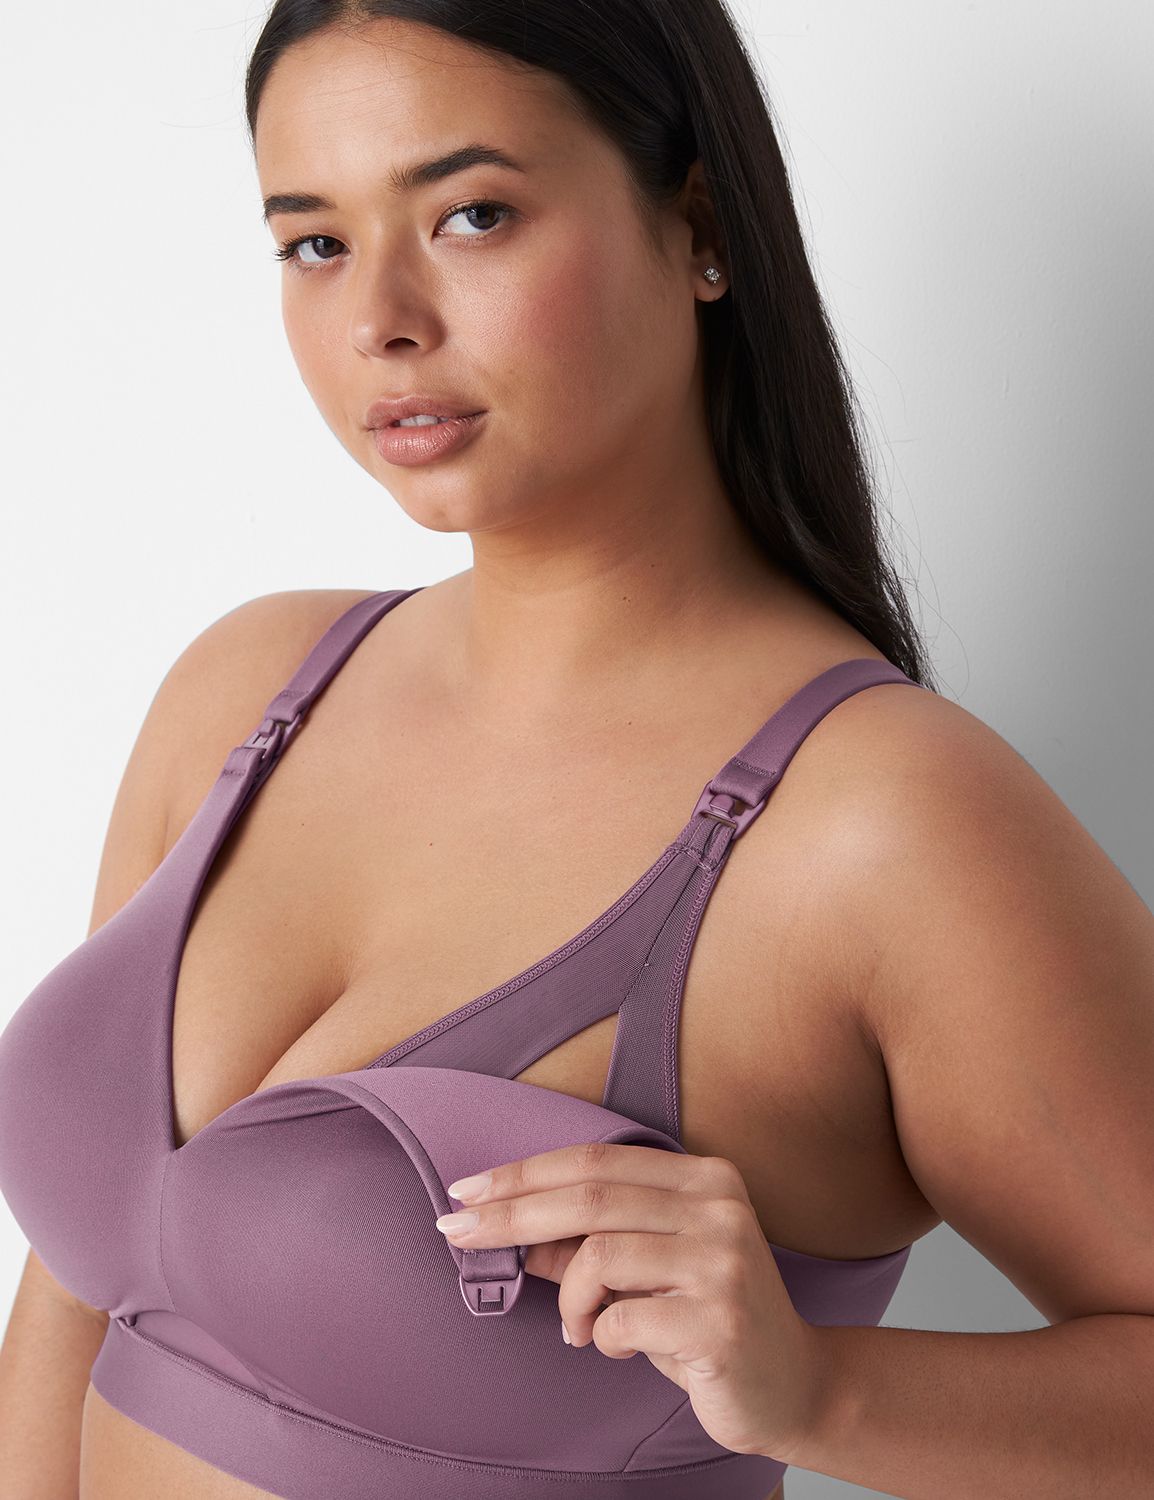 What should I look for in a nursing bra?